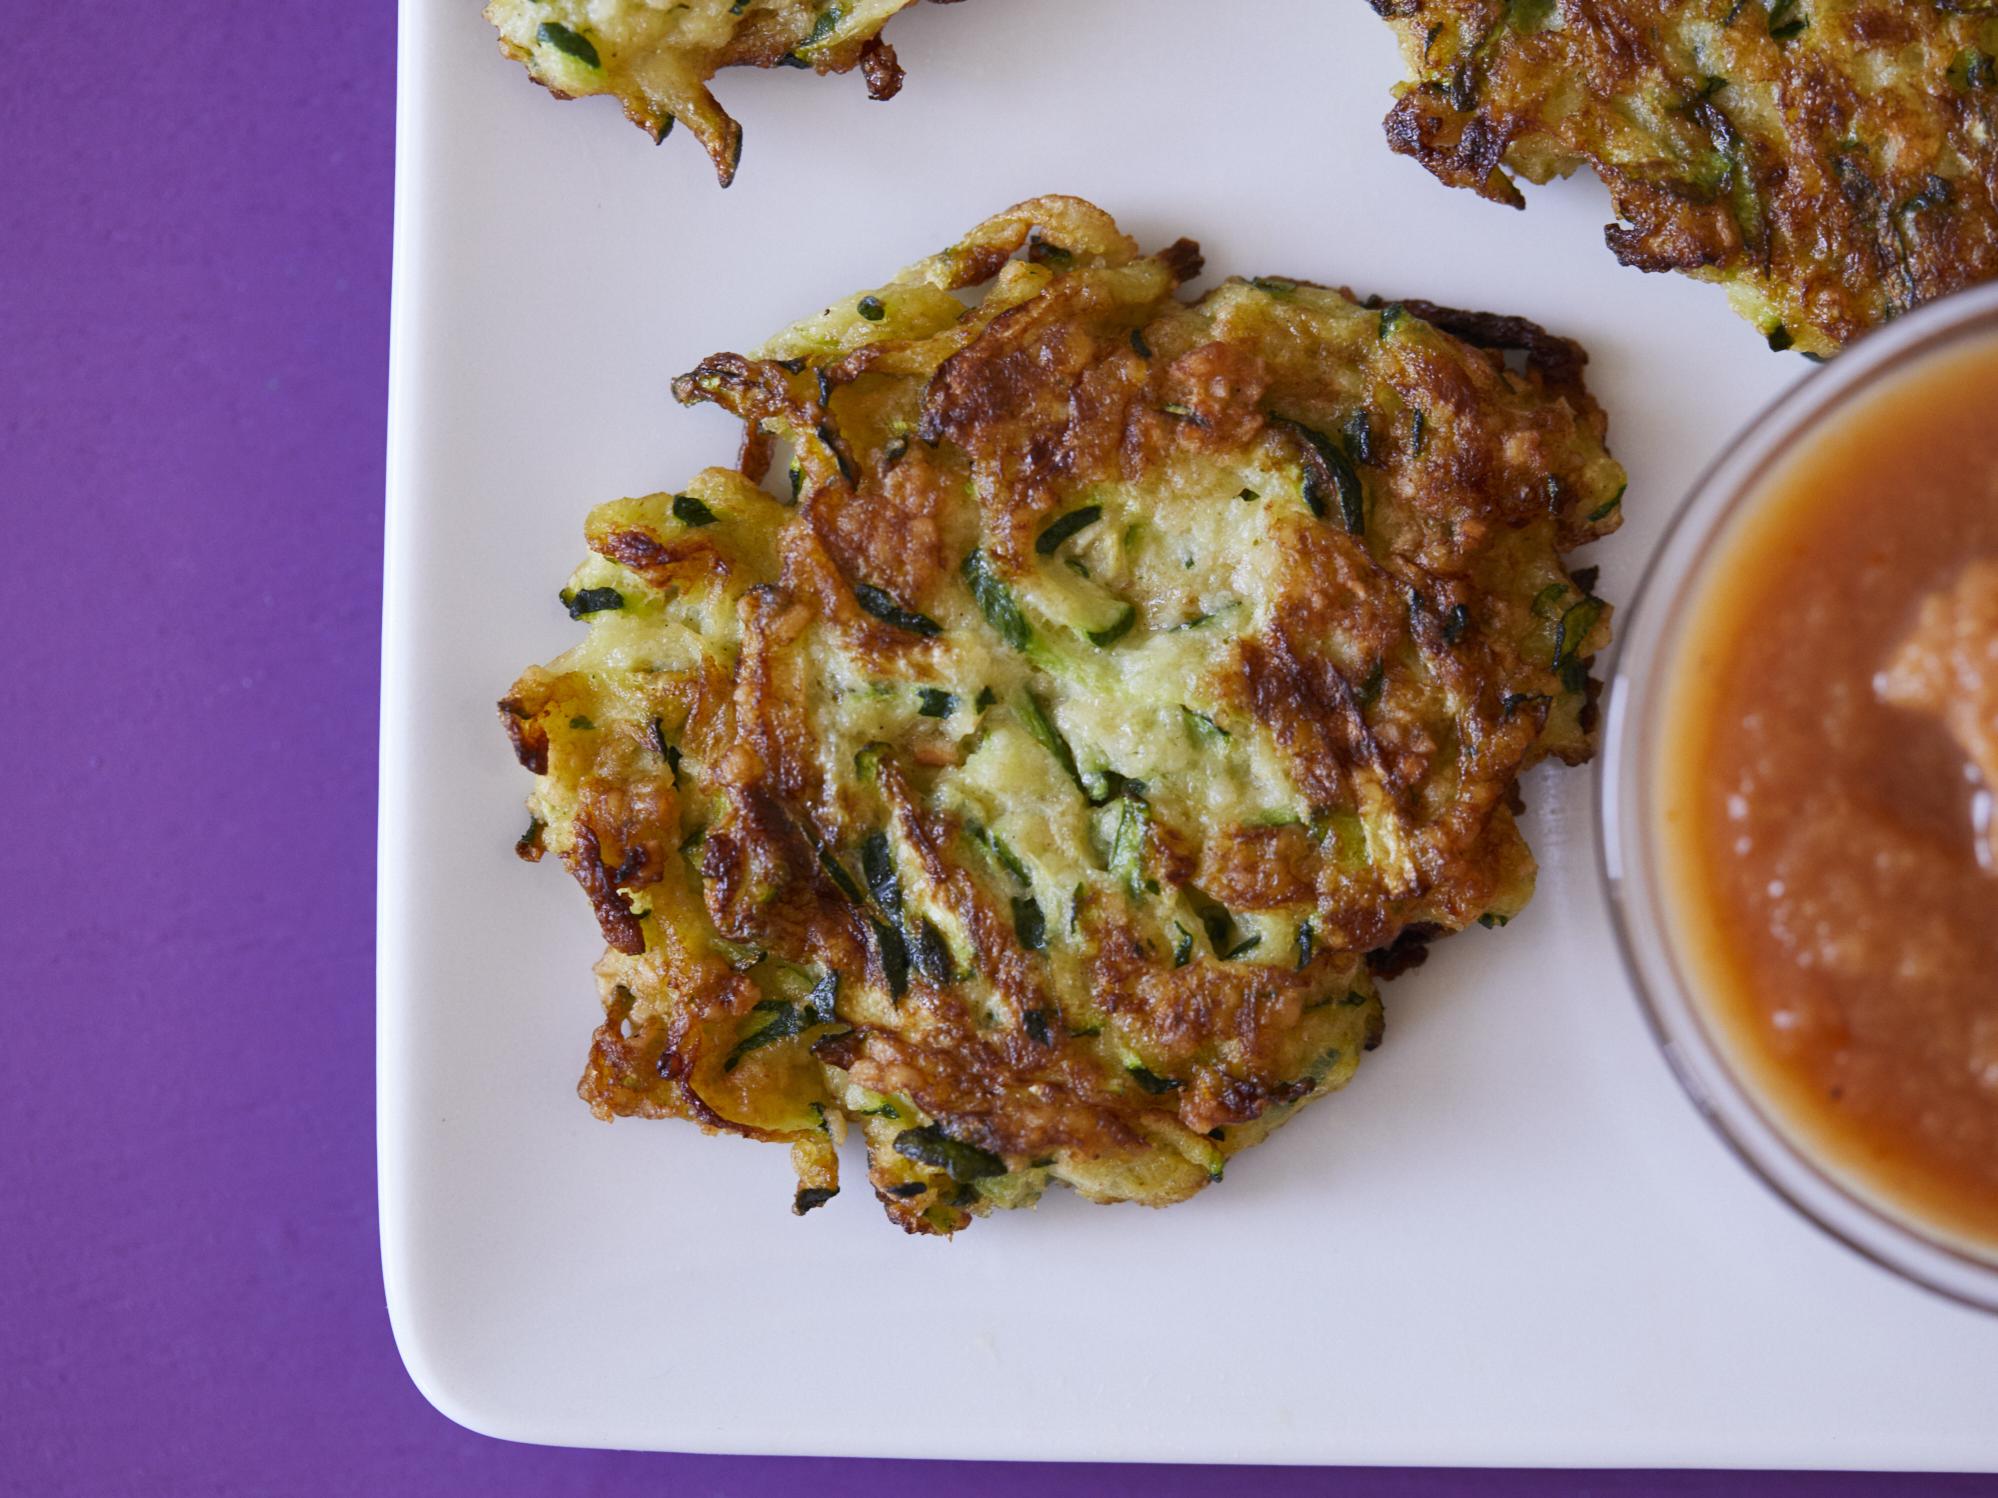  Golden brown zucchini latkes, crispy on the outside and soft on the inside.